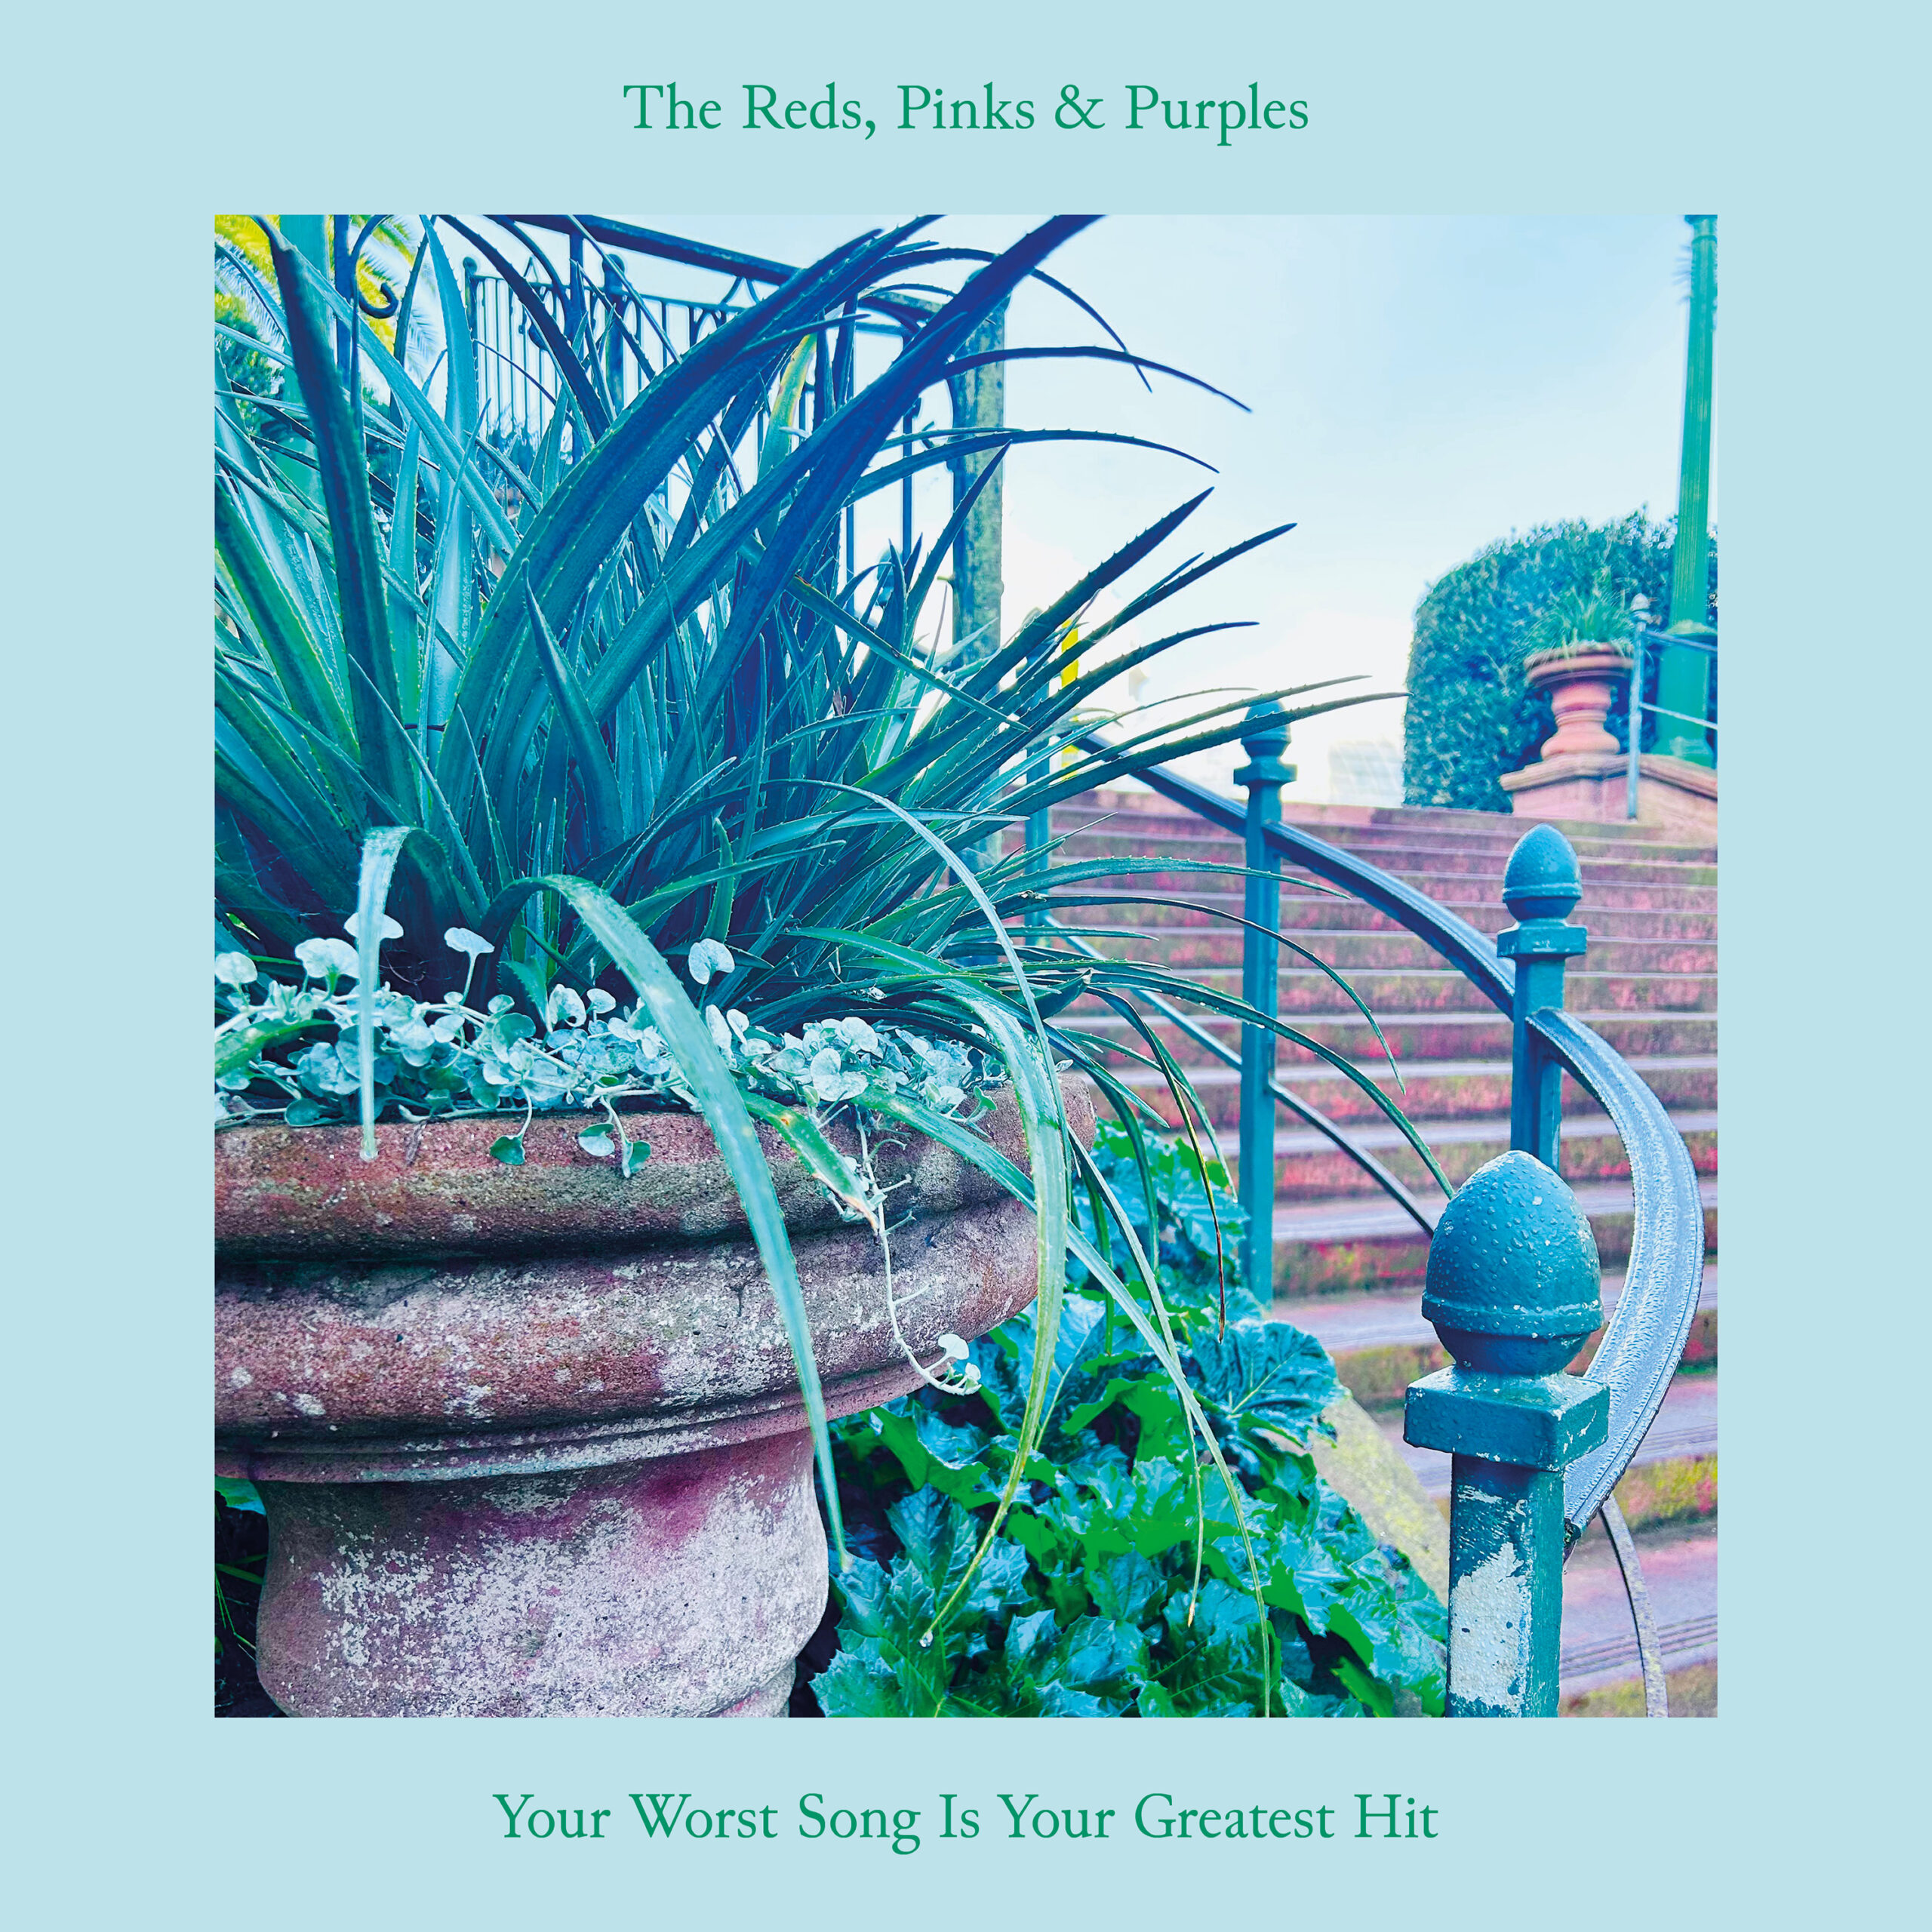 The Reds, Pinks & Purples announces new LP, shares “Your Worst Song Is Your Greatest Hit”